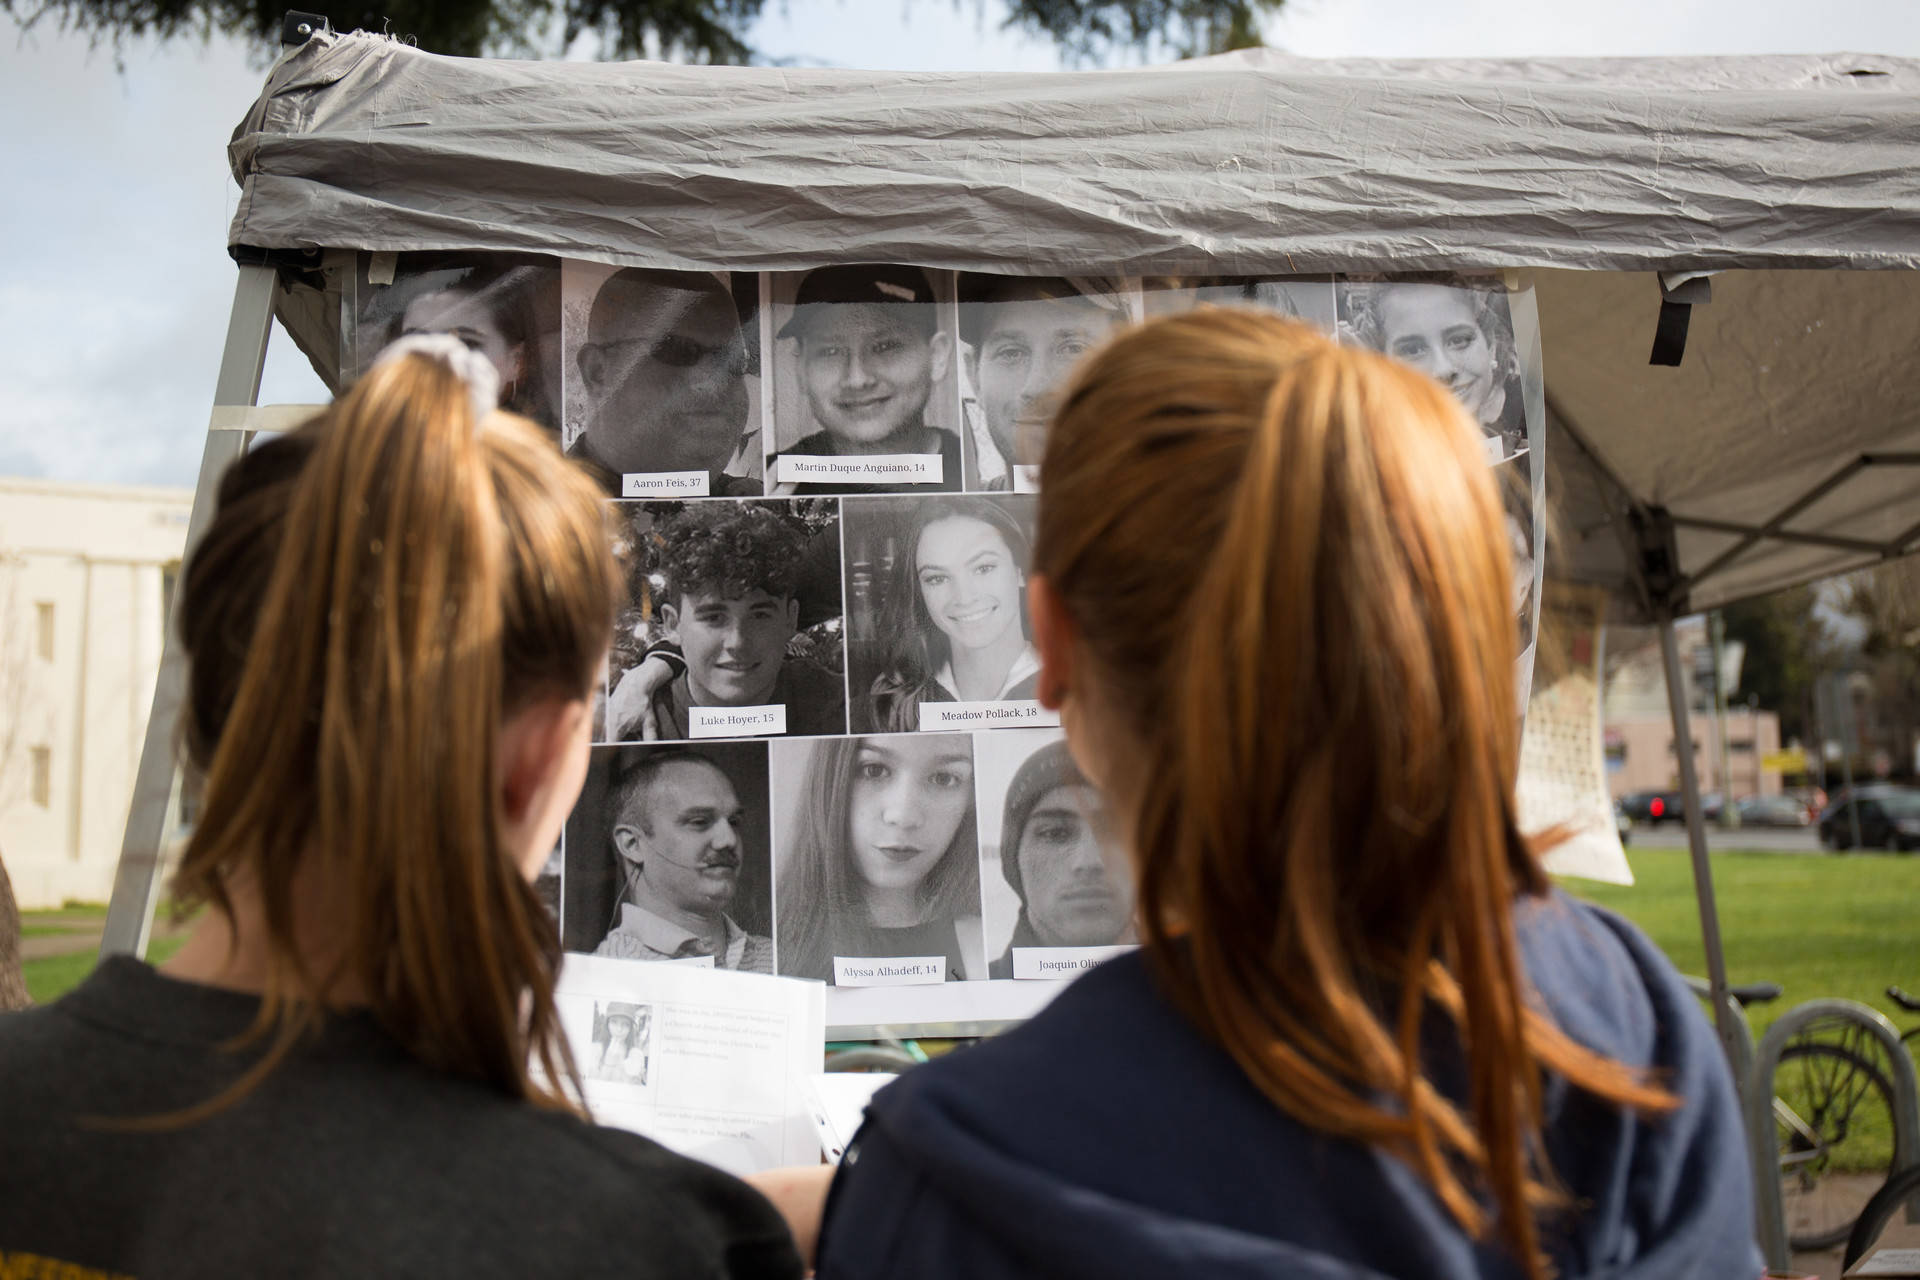 Students at Oakland Technical High School look at a billboard with photos of the 17 victims of the Parkland, Florida, mass shooting during a walkout to protest gun violence on March 14, 2018. Samantha Shanahan/KQED